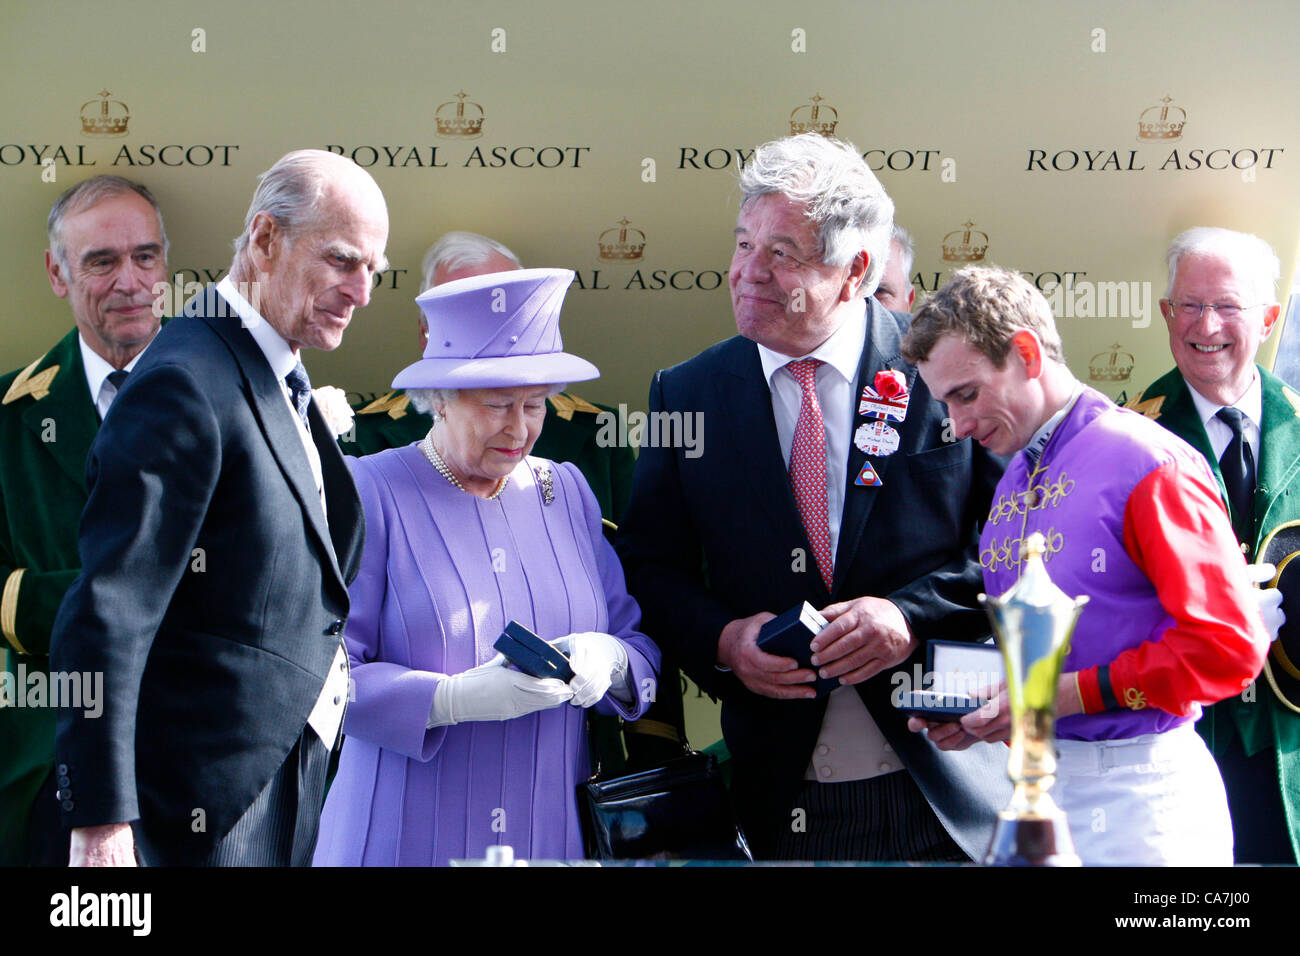 22.06.12 Ascot, Windsor, ENGLAND:  Prince Philip, Duke of Edinburgh presents the Trophy to Queen Elizabeth II as the owner with Sir Michael Stoute and Jockey Ryan Moore The Queens Vase during Royal Ascot Festival at Ascot racecourse on June 22, 2012 in Ascot, England. Stock Photo